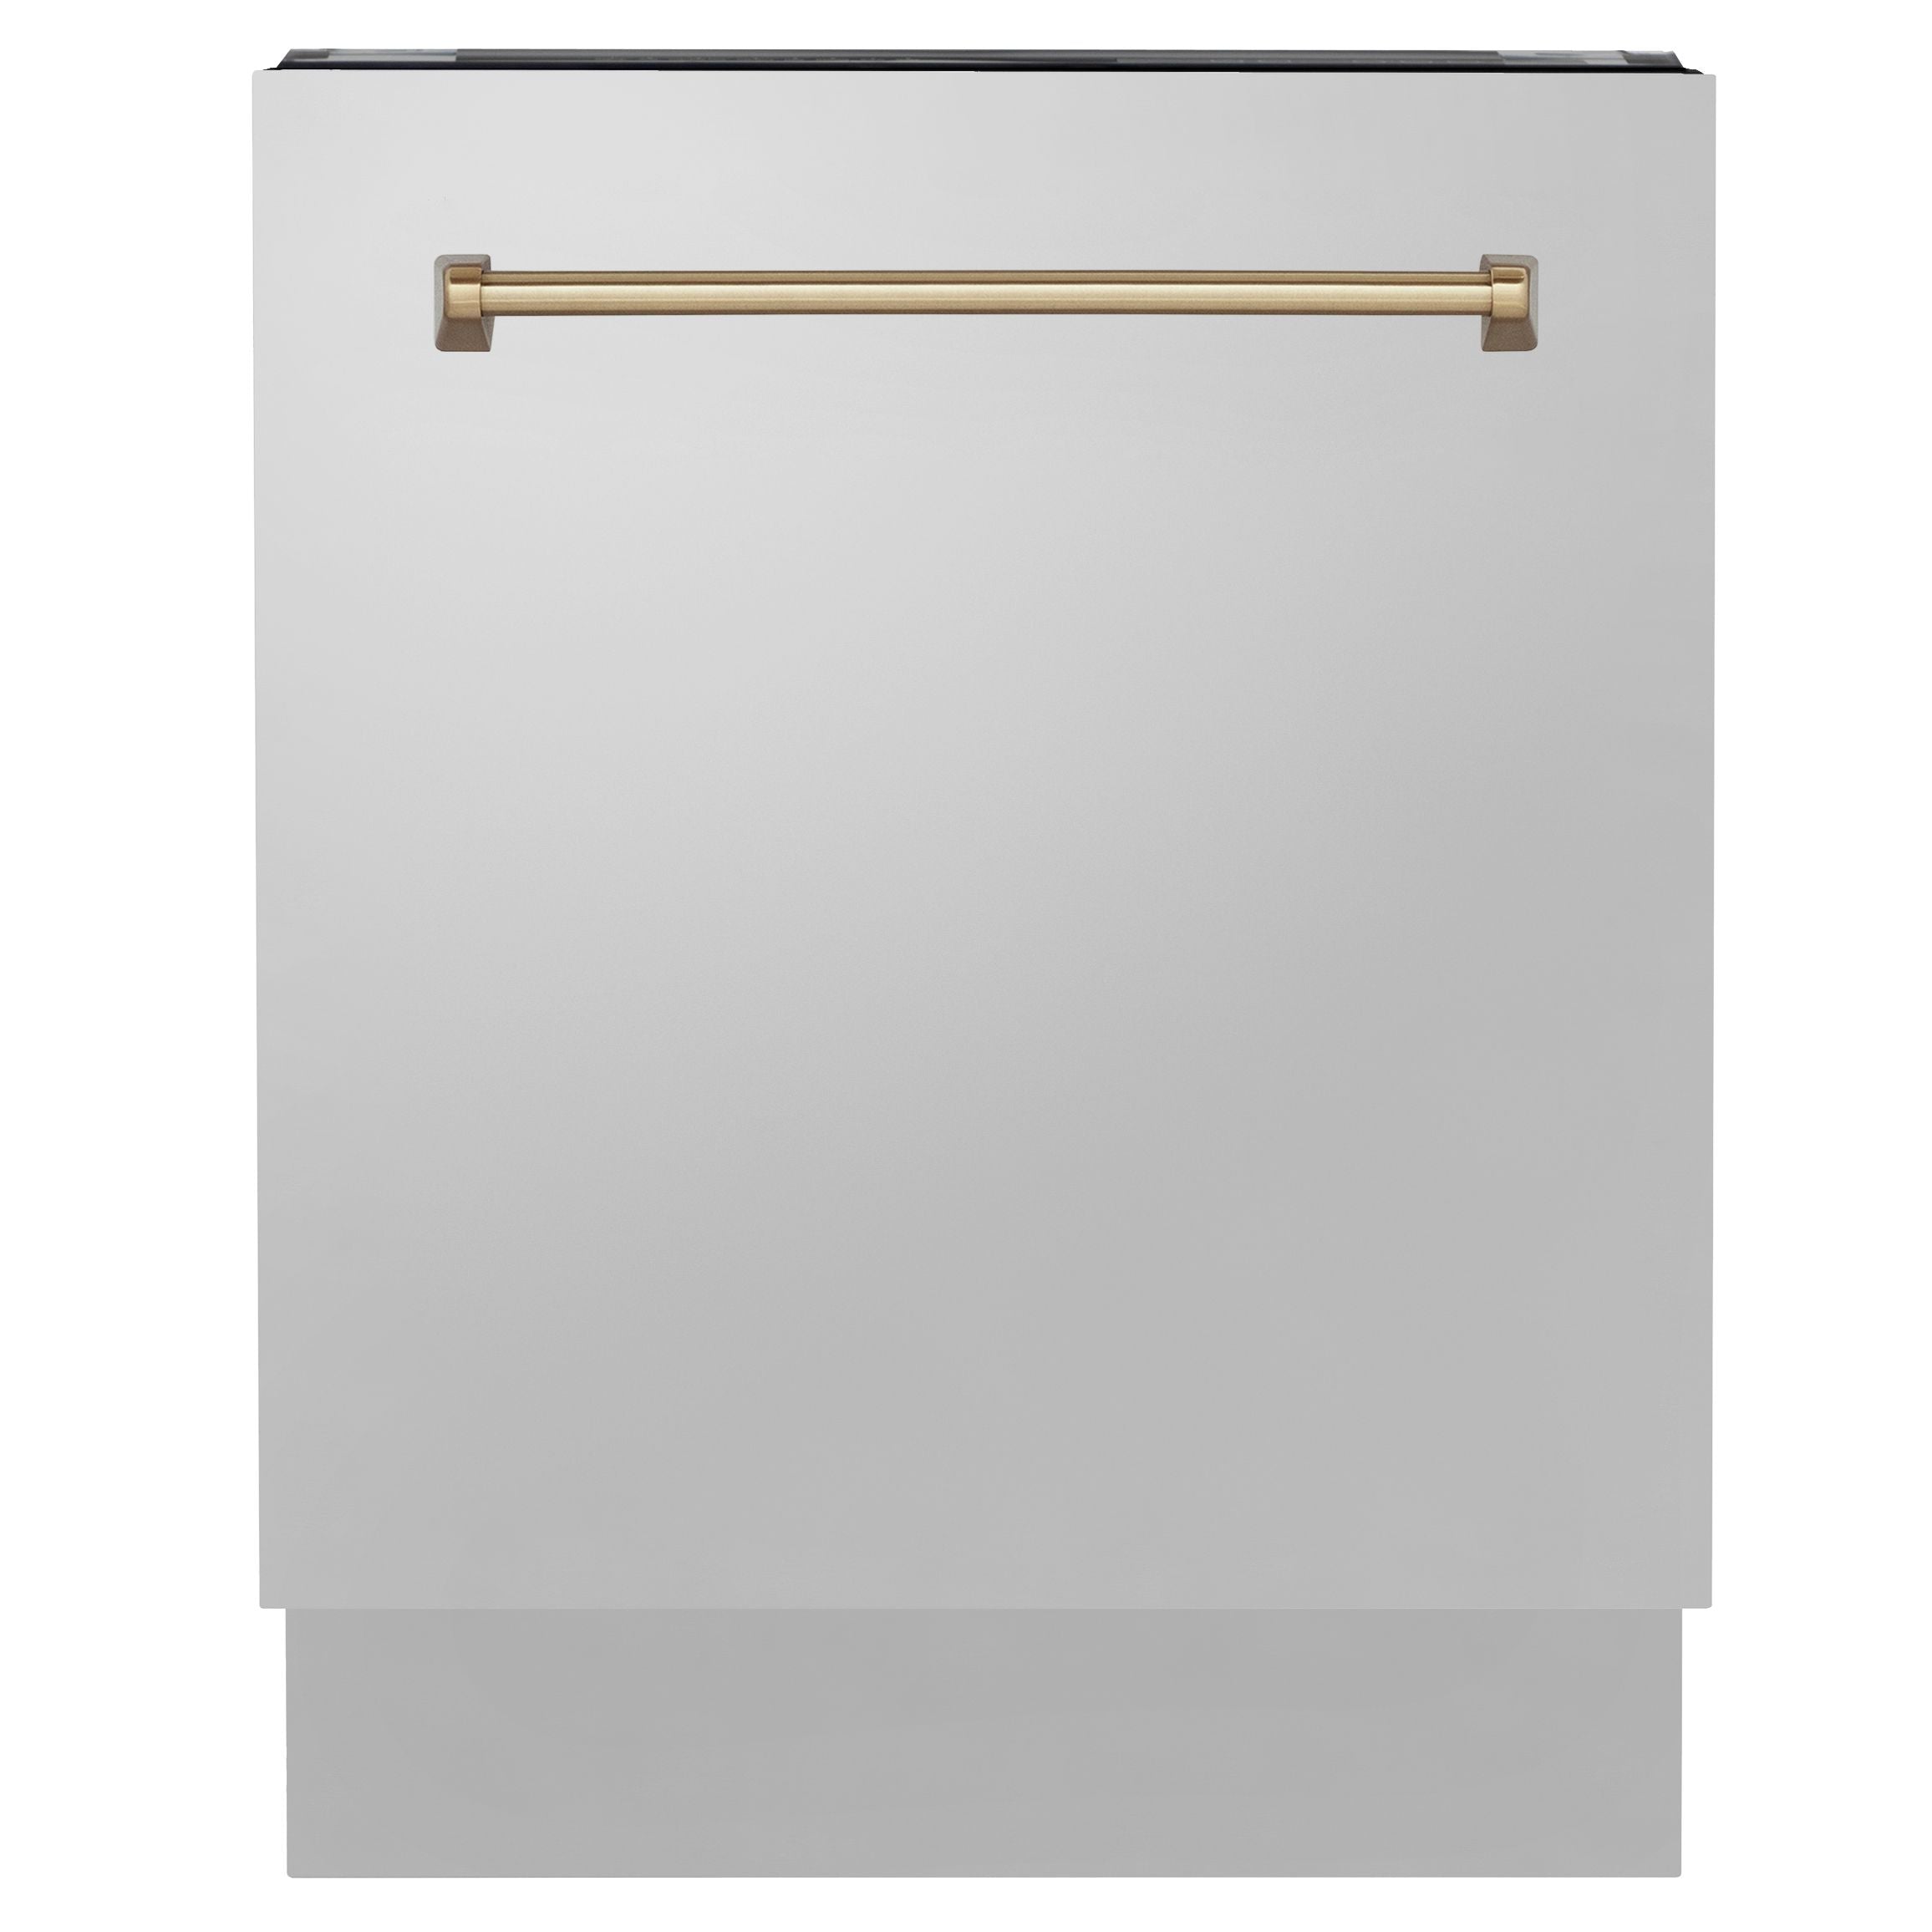 ZLINE Autograph Series 24 inch Tall Dishwasher in Stainless Steel with Champagne Bronze Handle